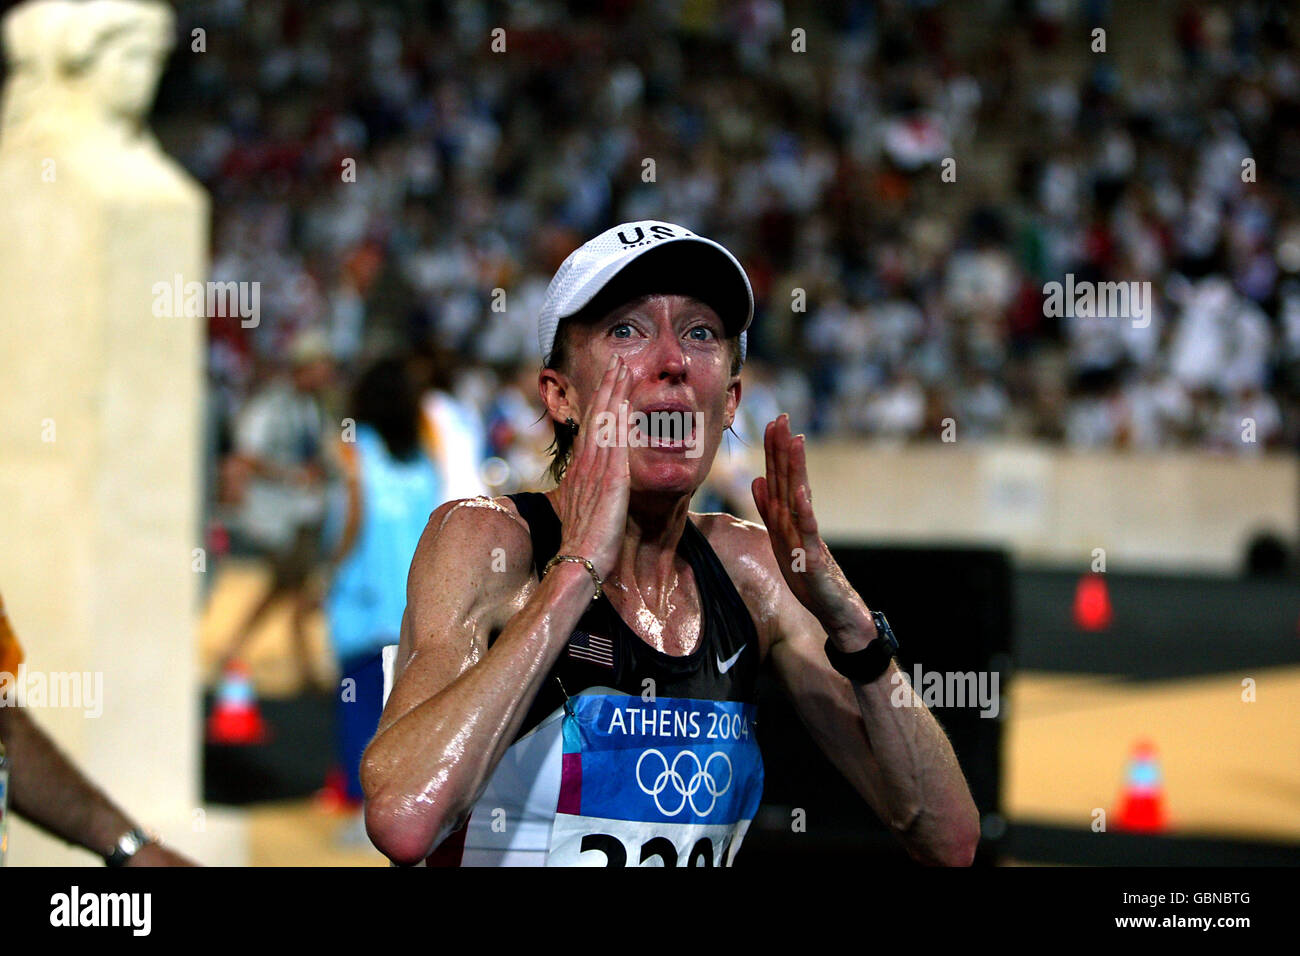 Athletics - Athens Olympic Games 2004 - Women's Marathon. USA's Deena Kastor is over whelmed as she crosses the finish line to win the bronze medal Stock Photo